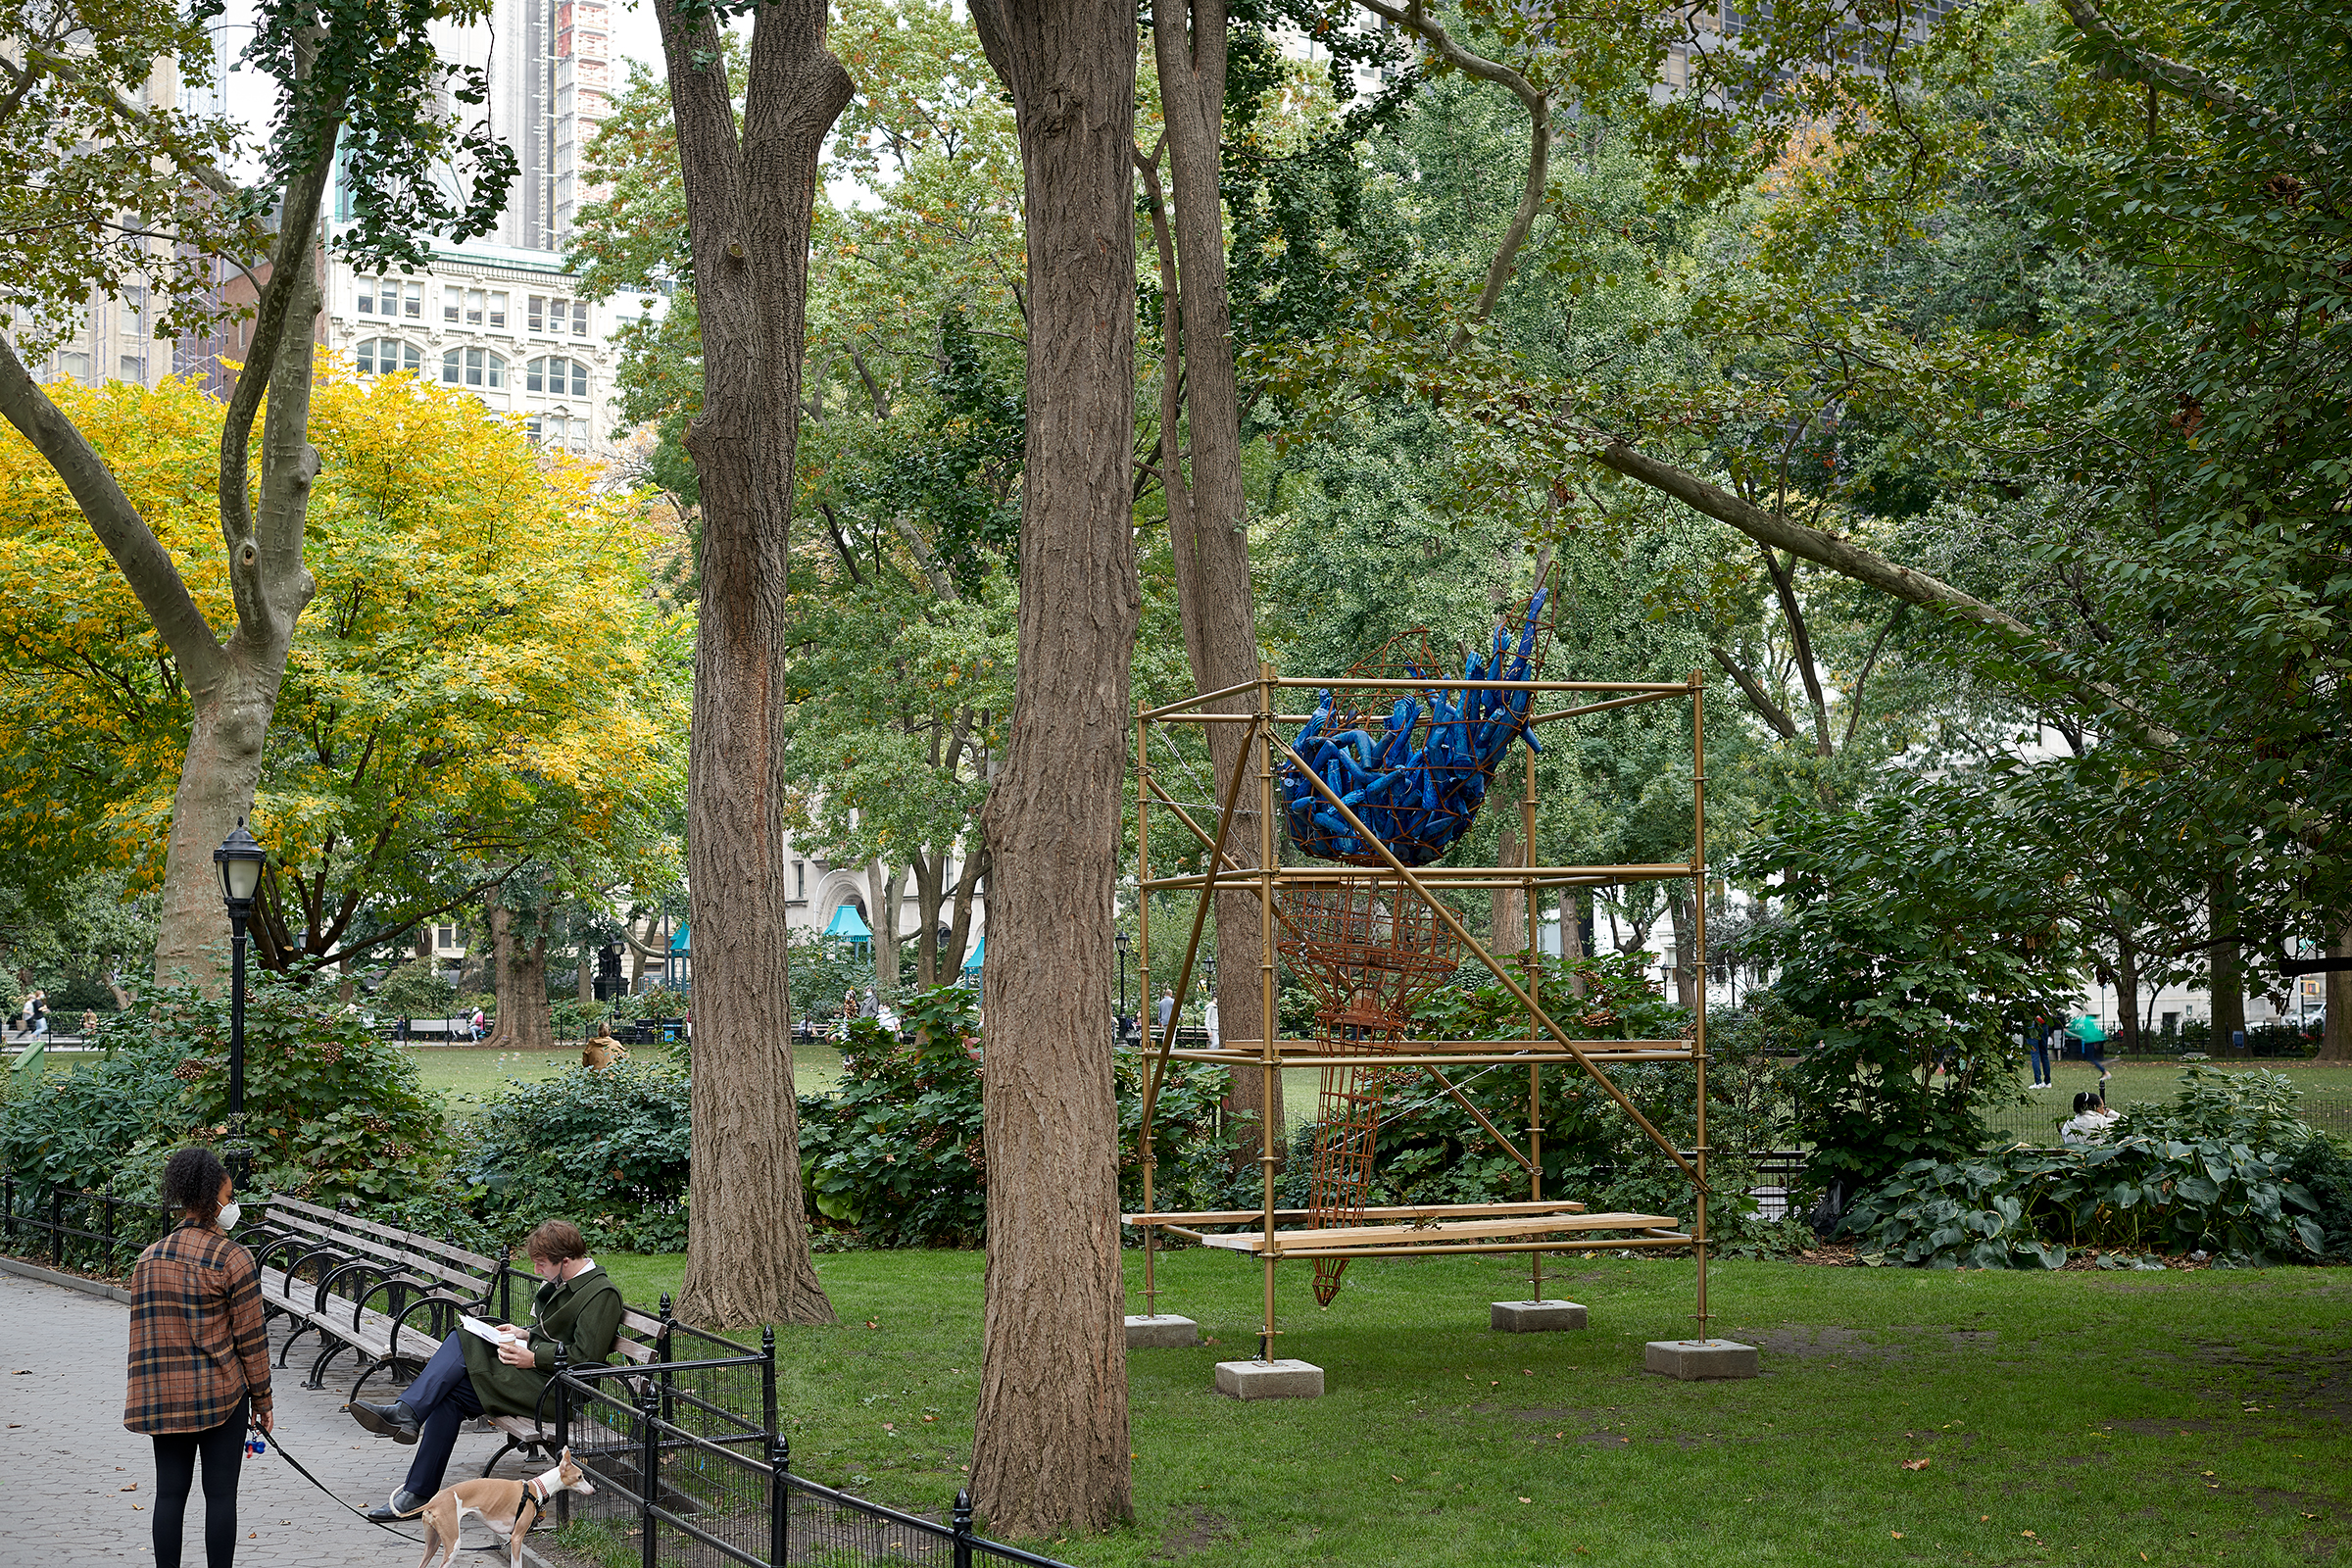 Abigail DeVille, Light of Freedom, 2020. Welded Steel, cabling, rusted metal ball, painted mannequin arms, painted metal scaffolding, wood. 156 x 96 x 96 inches. Collection the artist, courtesy the artist. ©2020 Abigail Deville. Photograph by Andy Romer/Madison Square Park Conservancy. The exhibition was organized by Madison Park Conservancy, New York, and was on view from October 27, 2020 through January 31, 2021.